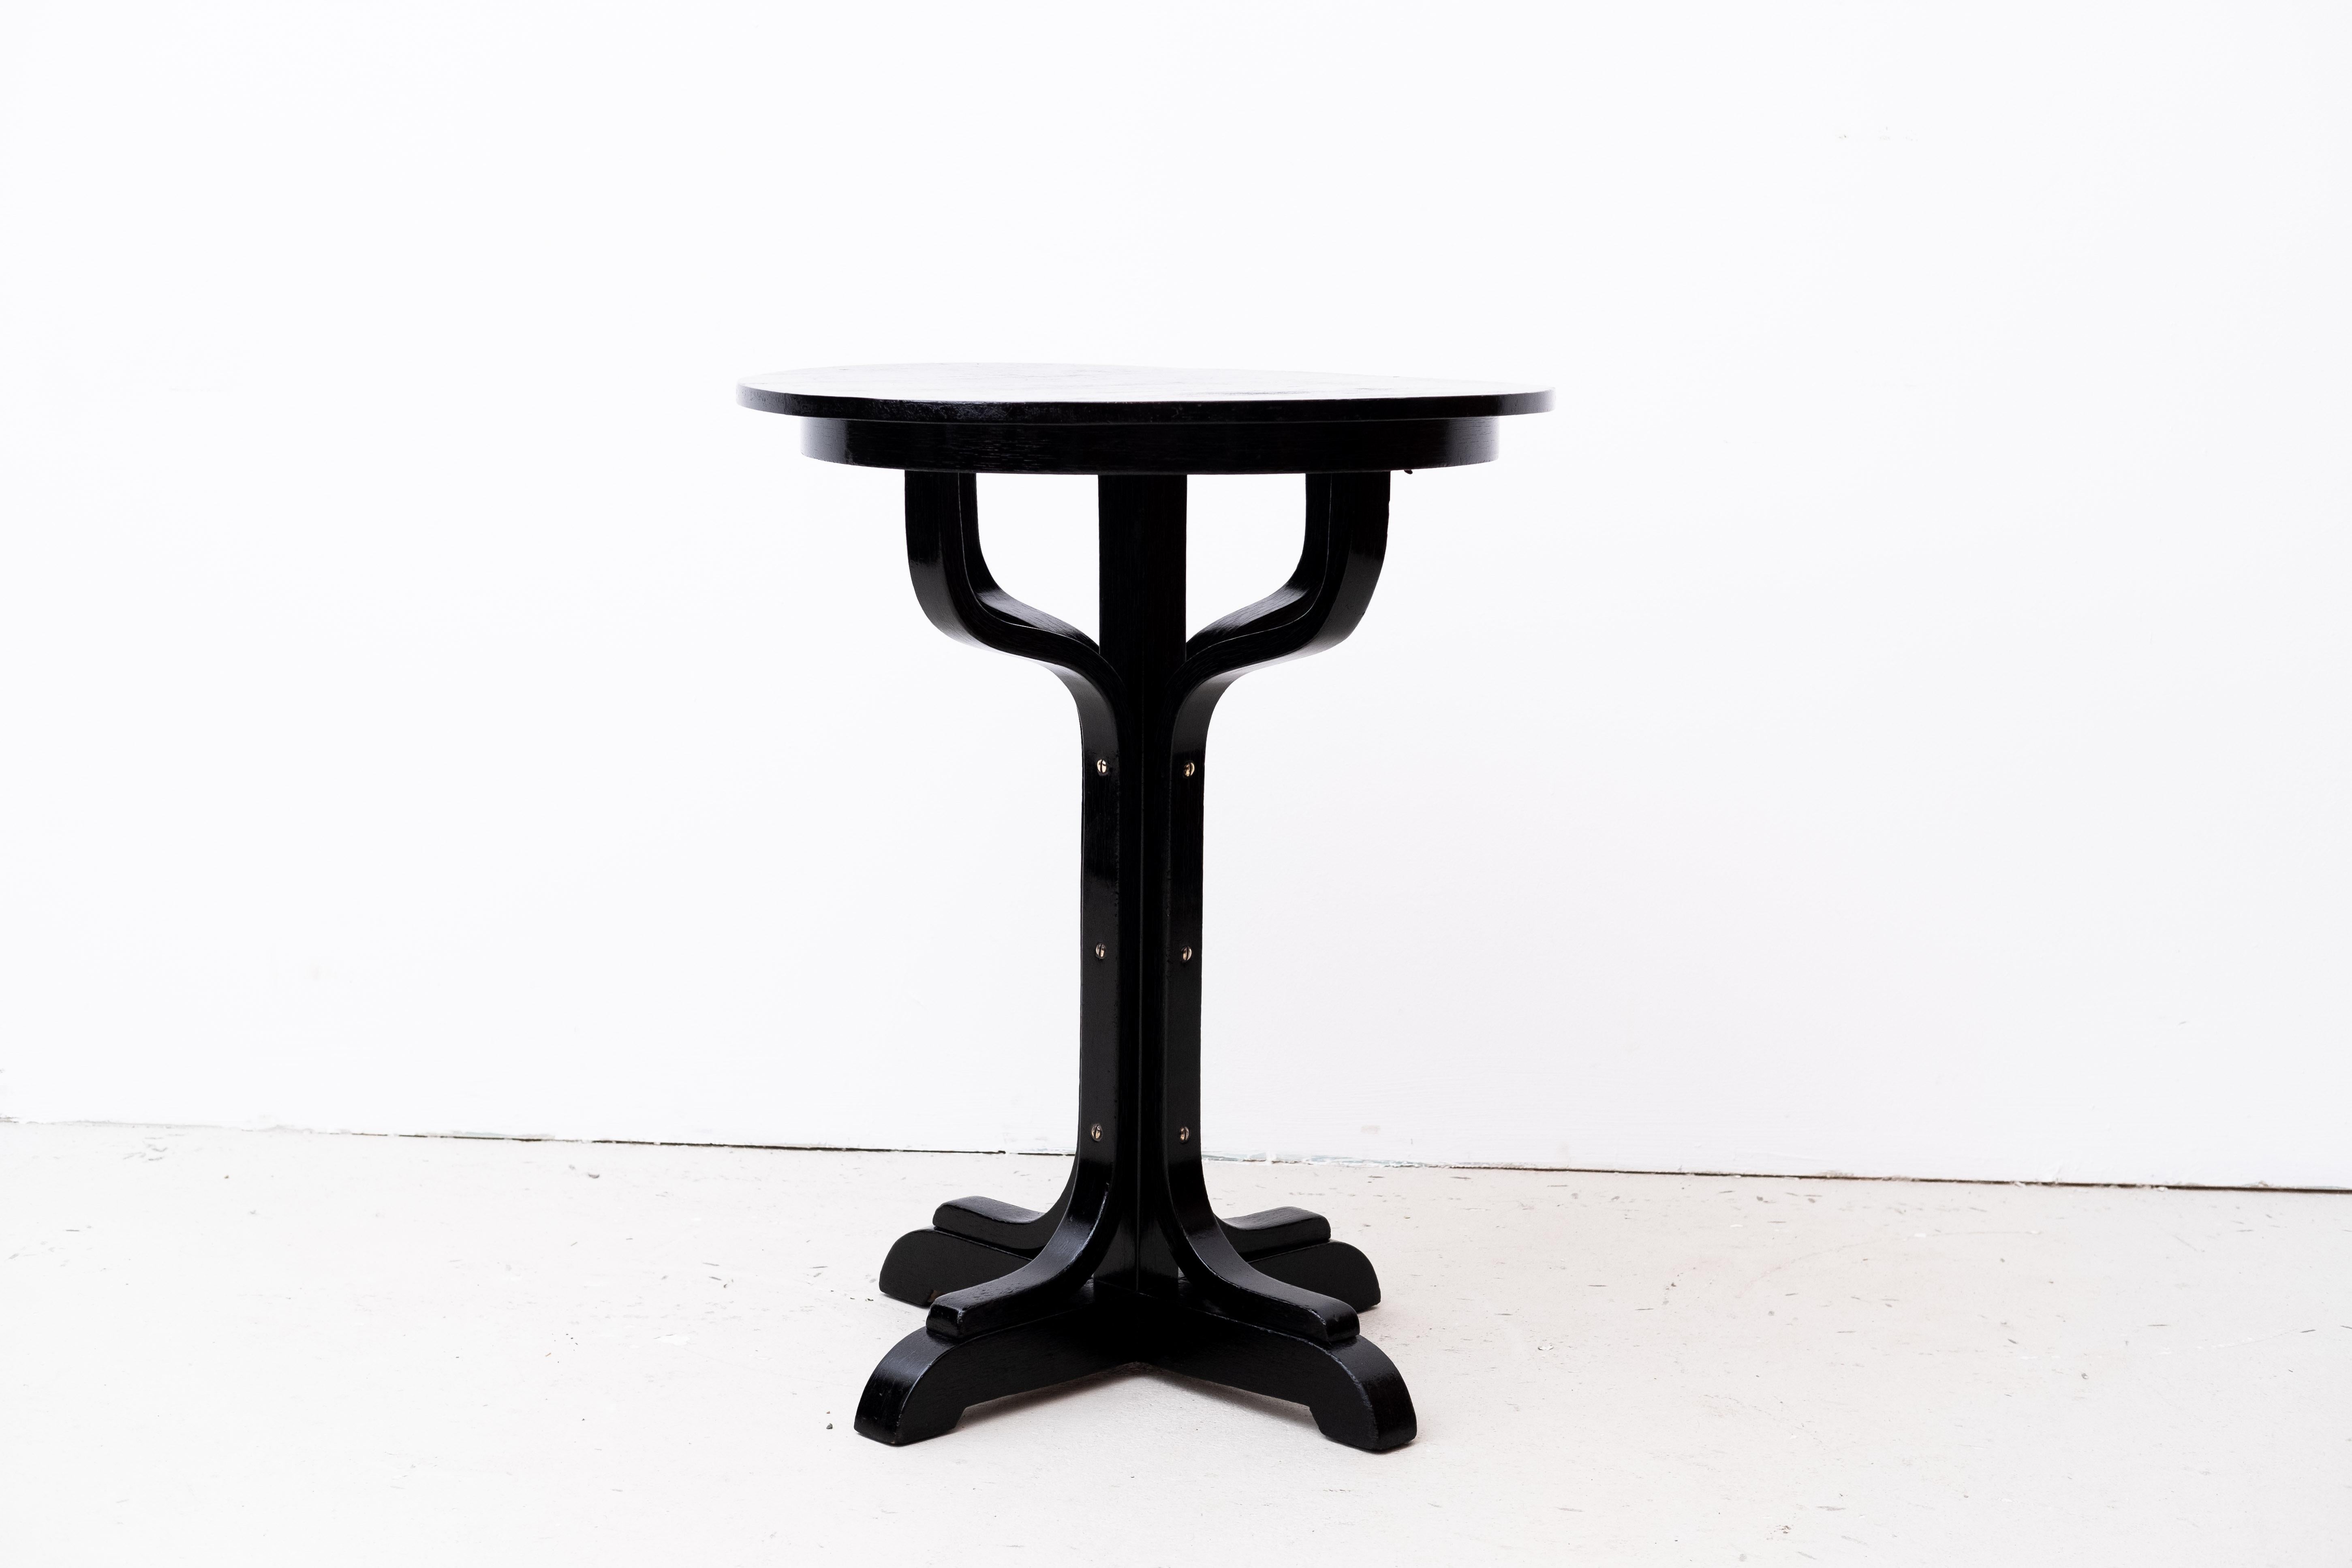 Beech Art Nouveau Sidetable, Otto Wagner for Thonet Brothers, Type 8024 (Vienna, 1905) For Sale